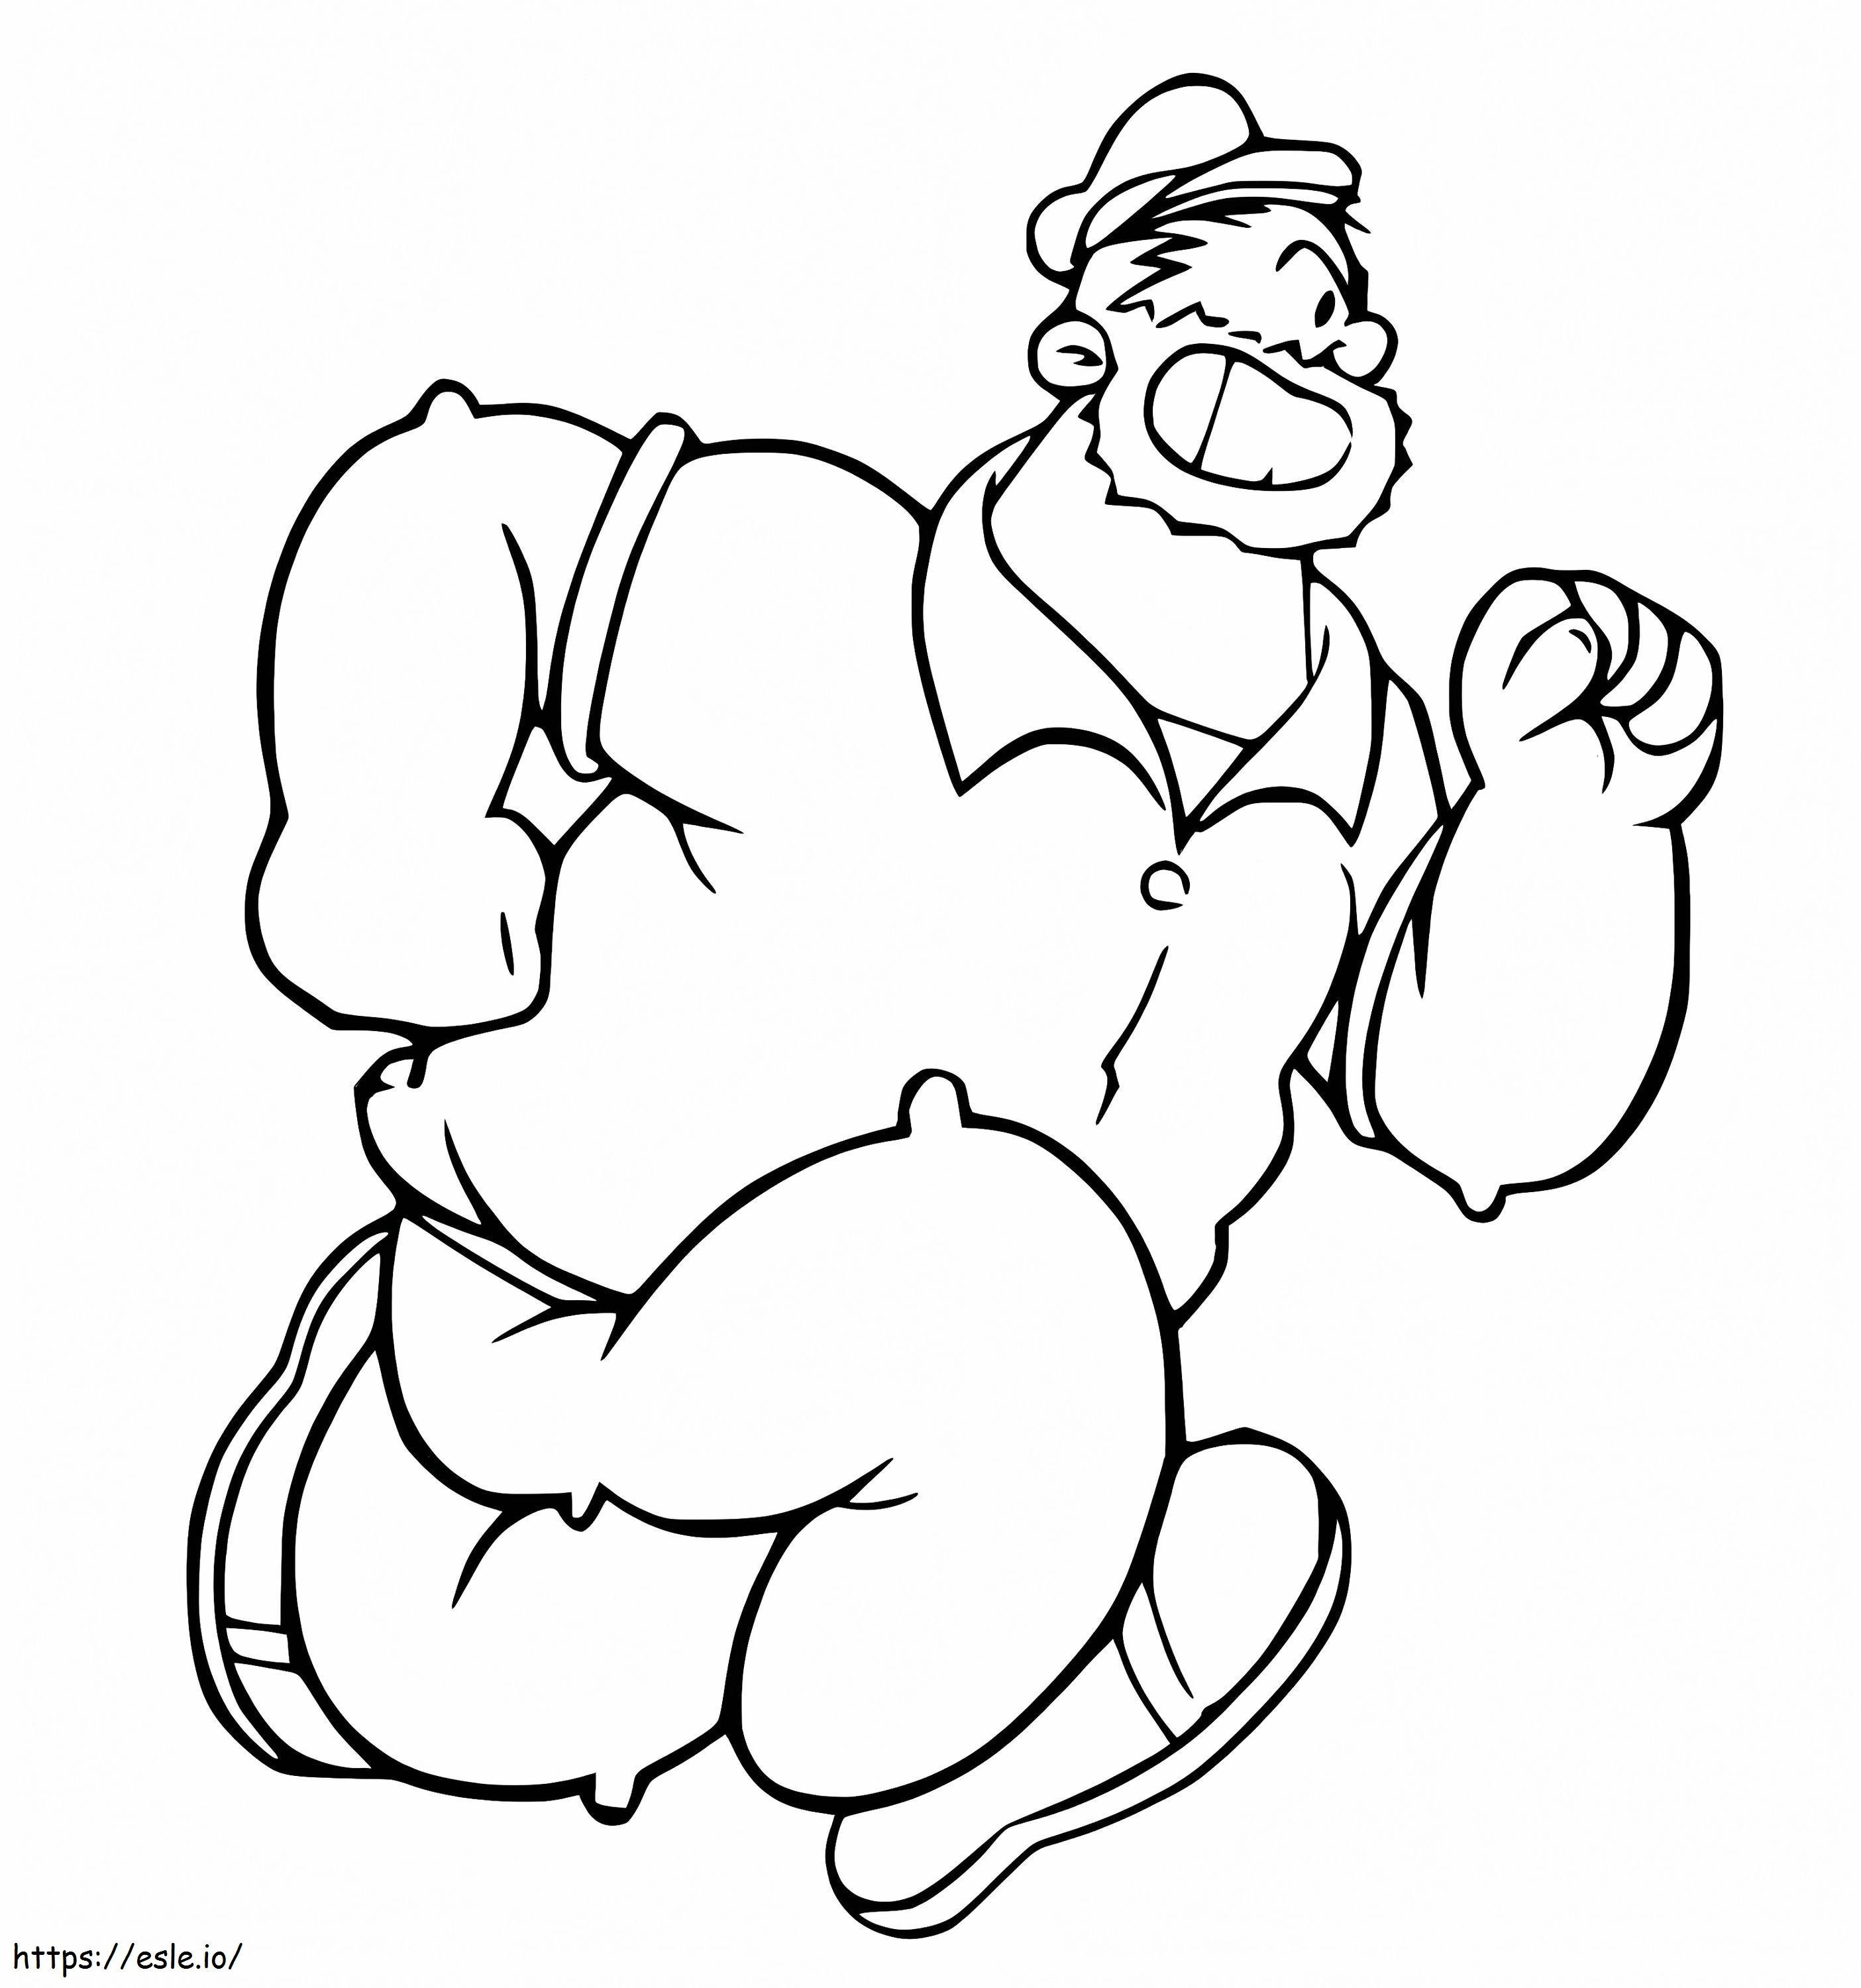 Bluto Running coloring page